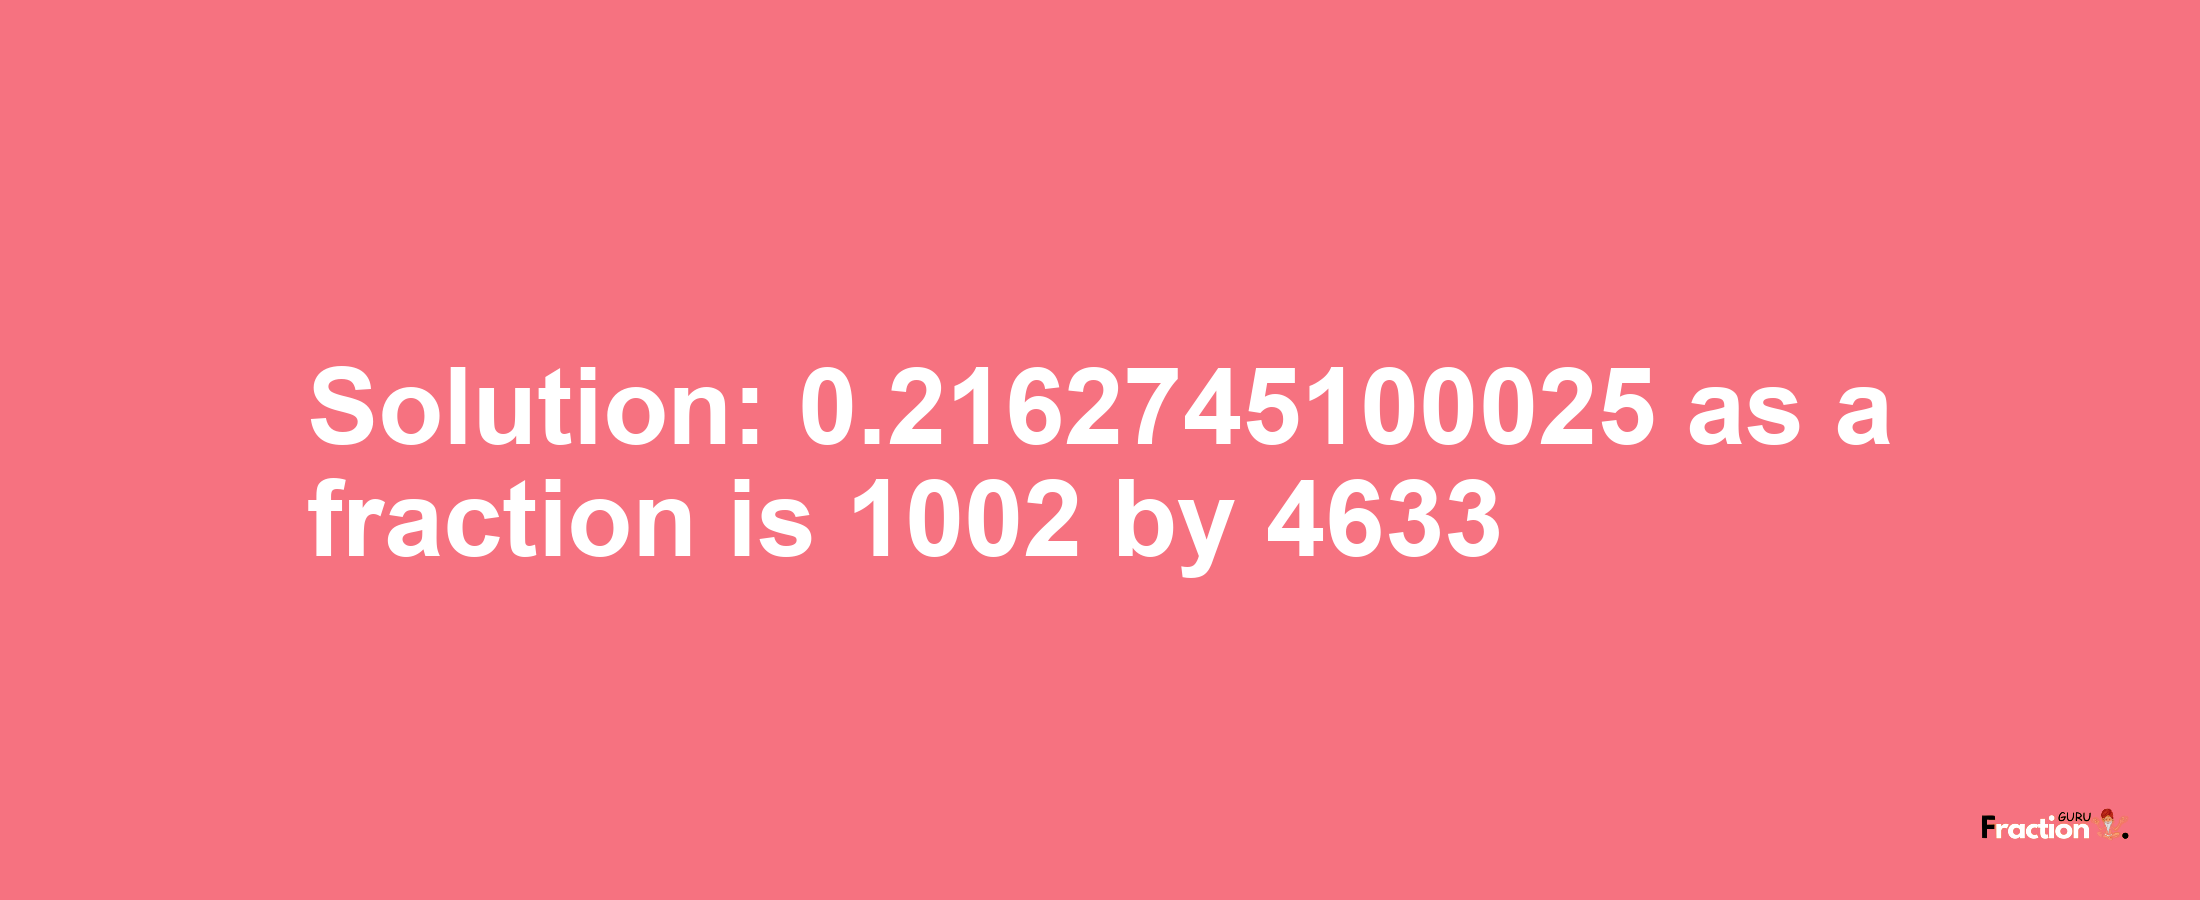 Solution:0.2162745100025 as a fraction is 1002/4633